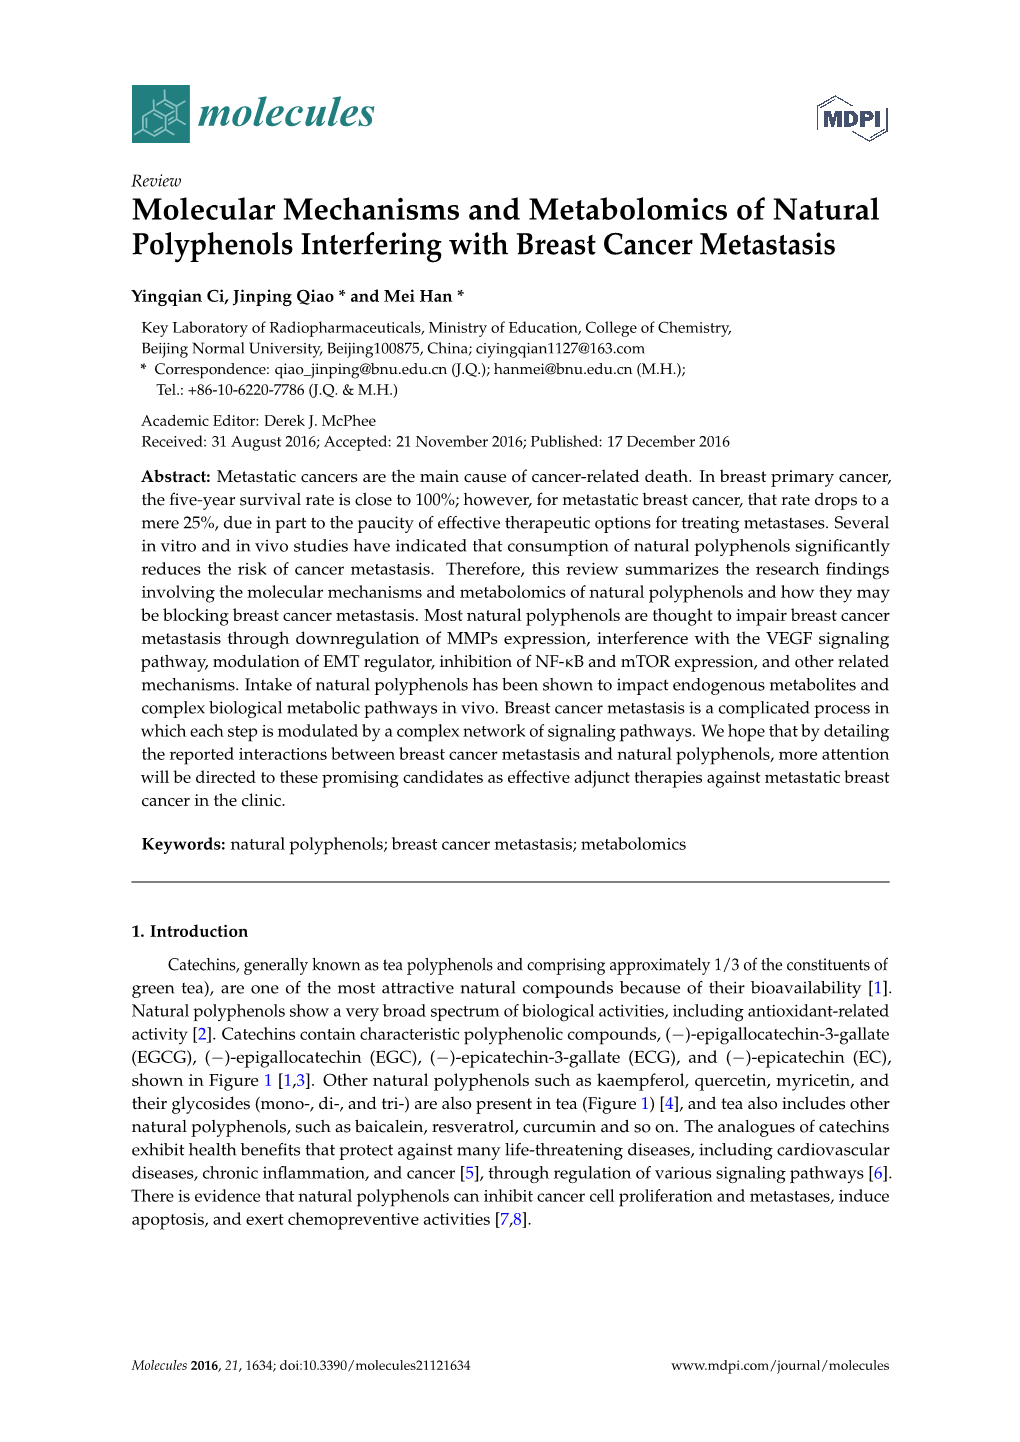 Polyphenols Interfering with Breast Cancer Metastasis